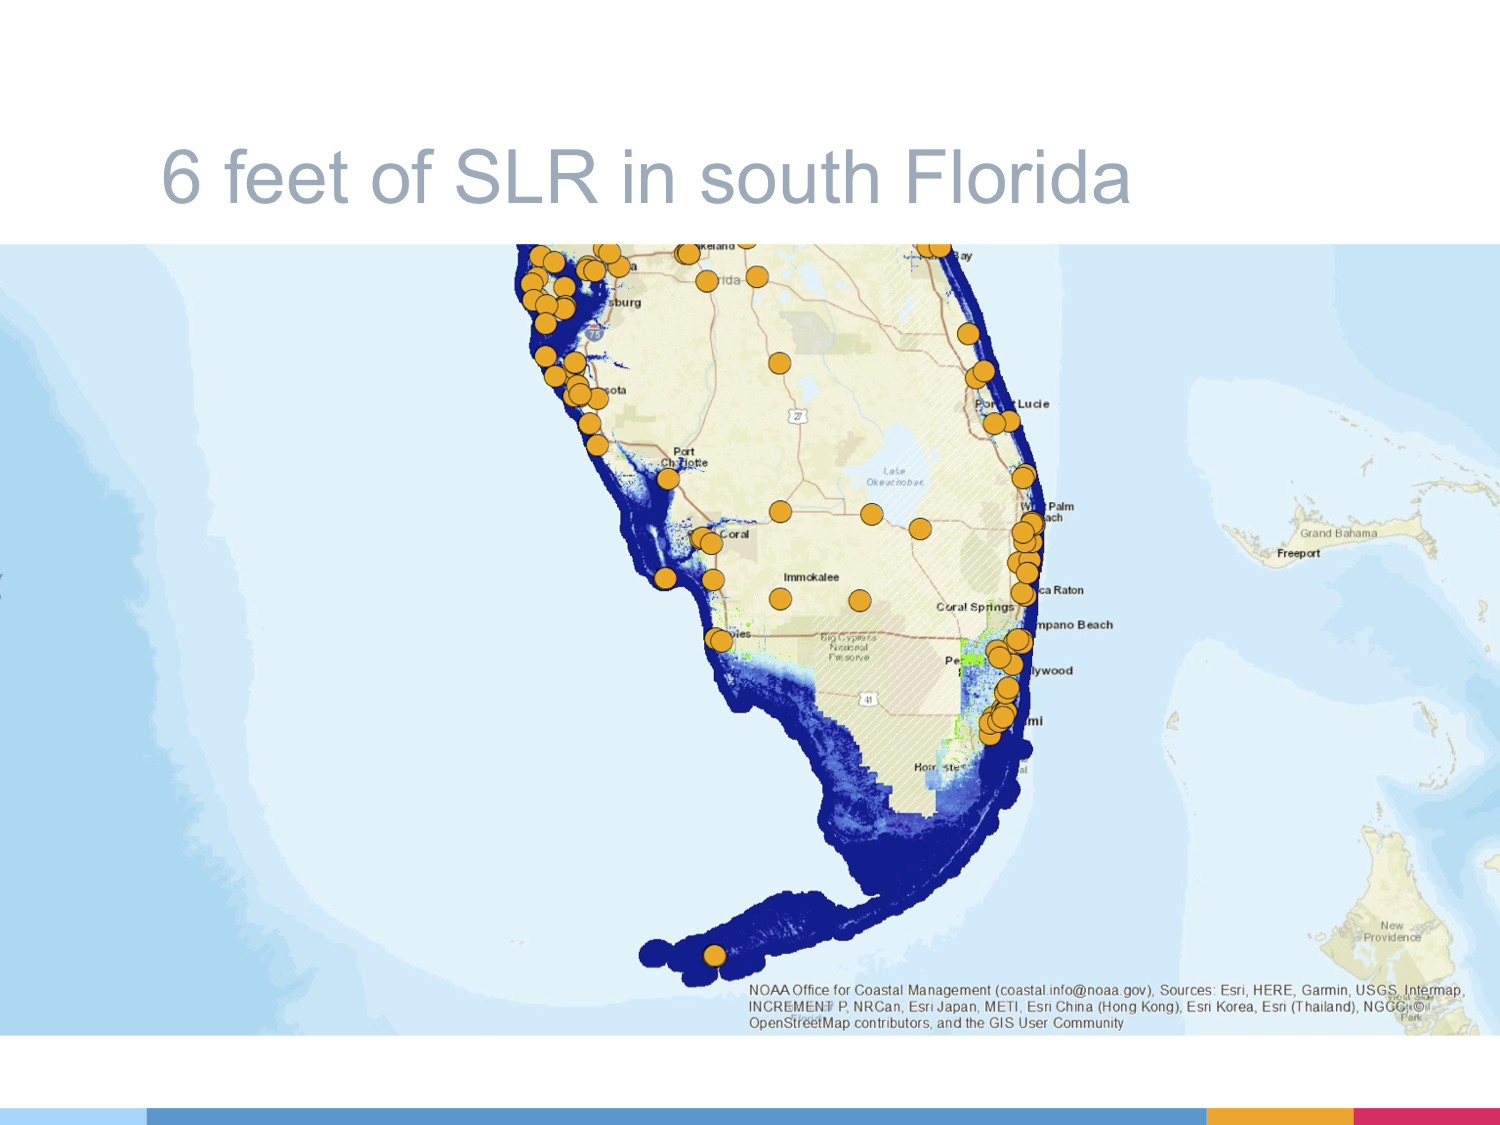 Slide from presentation made by Tansey and Goldman showing six feet of sea level rise, a possible level of change in about a century that assumes a “business as usual” nonresponse to climate change, overlain with known archive locations in Florida.